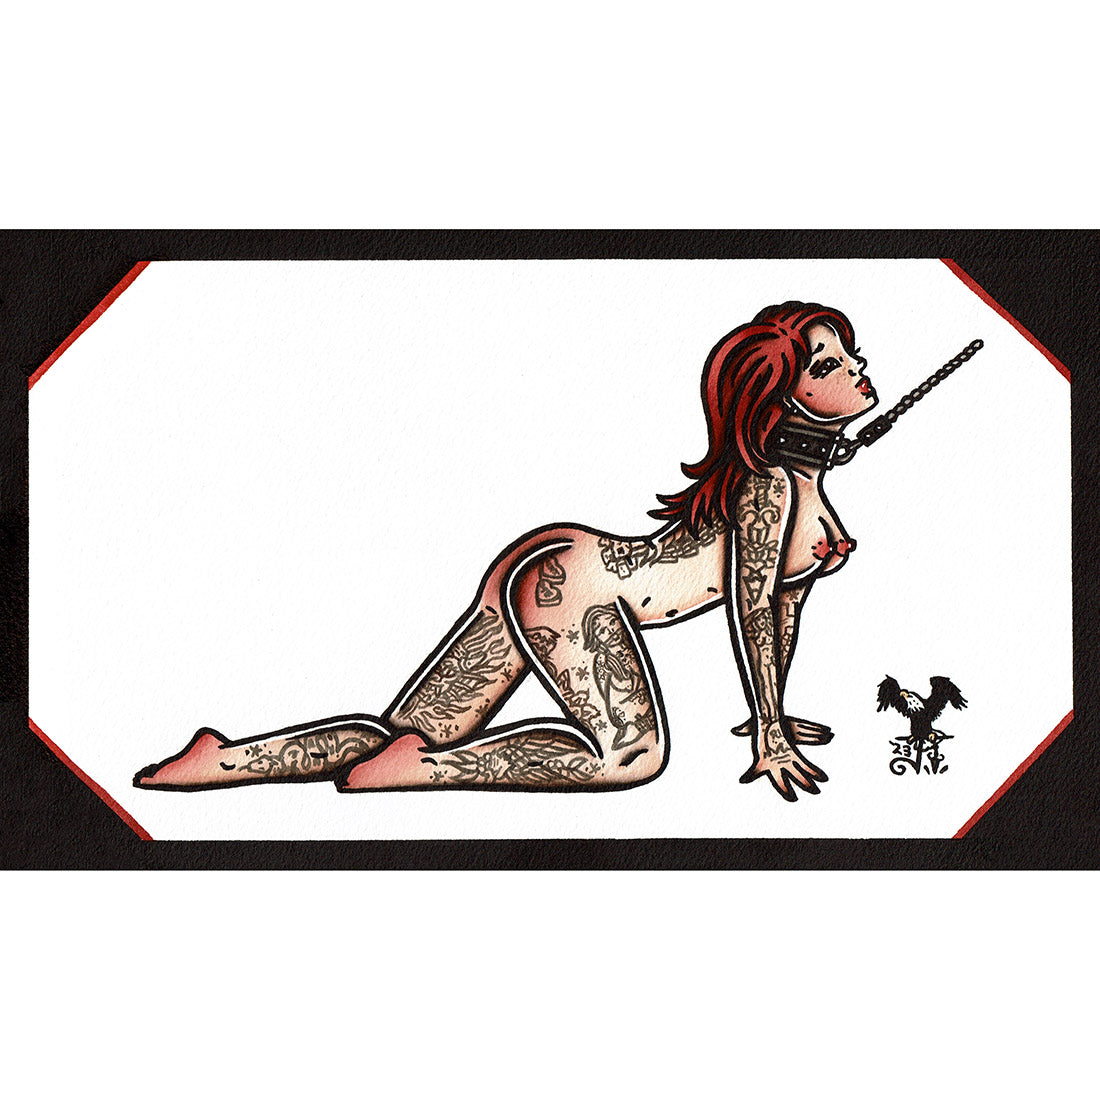 American traditional tattoo flash illustration Leather Leash Bondage Pinup watercolor painting.